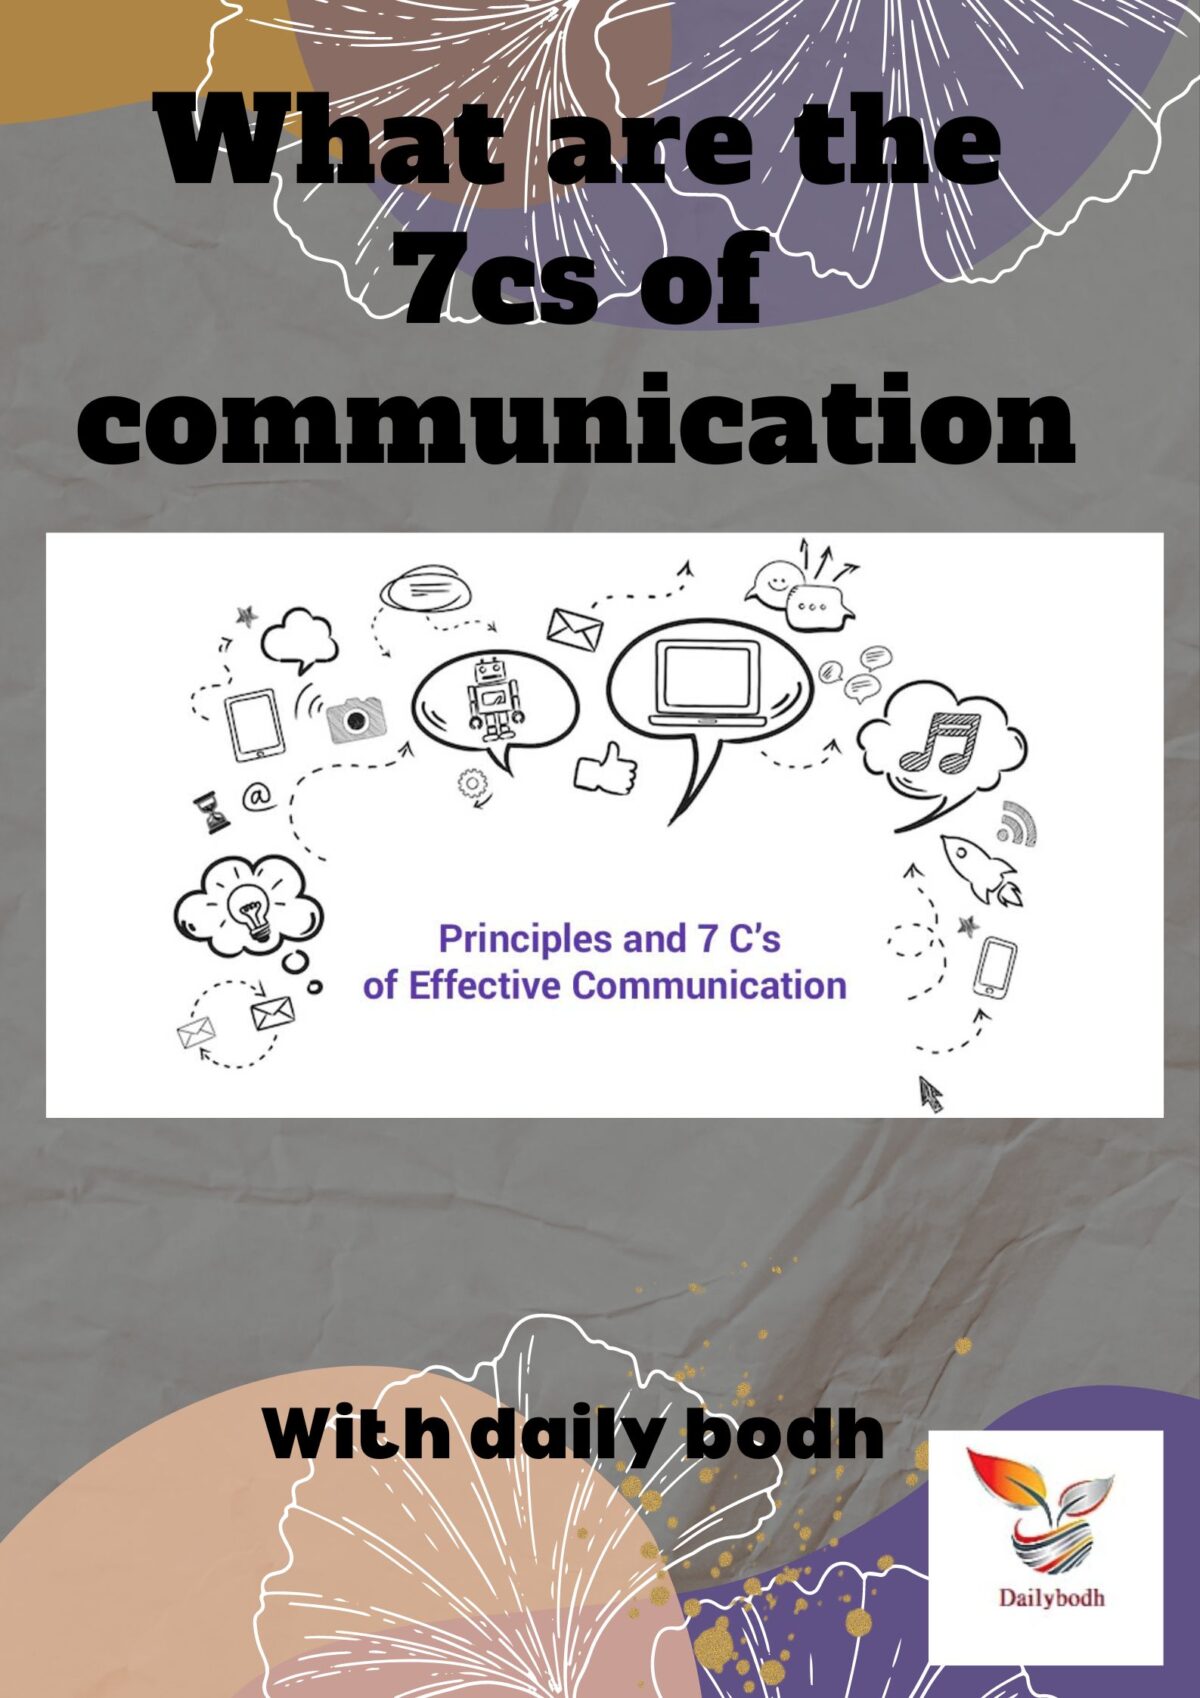 You are currently viewing What are the 7cs of communication